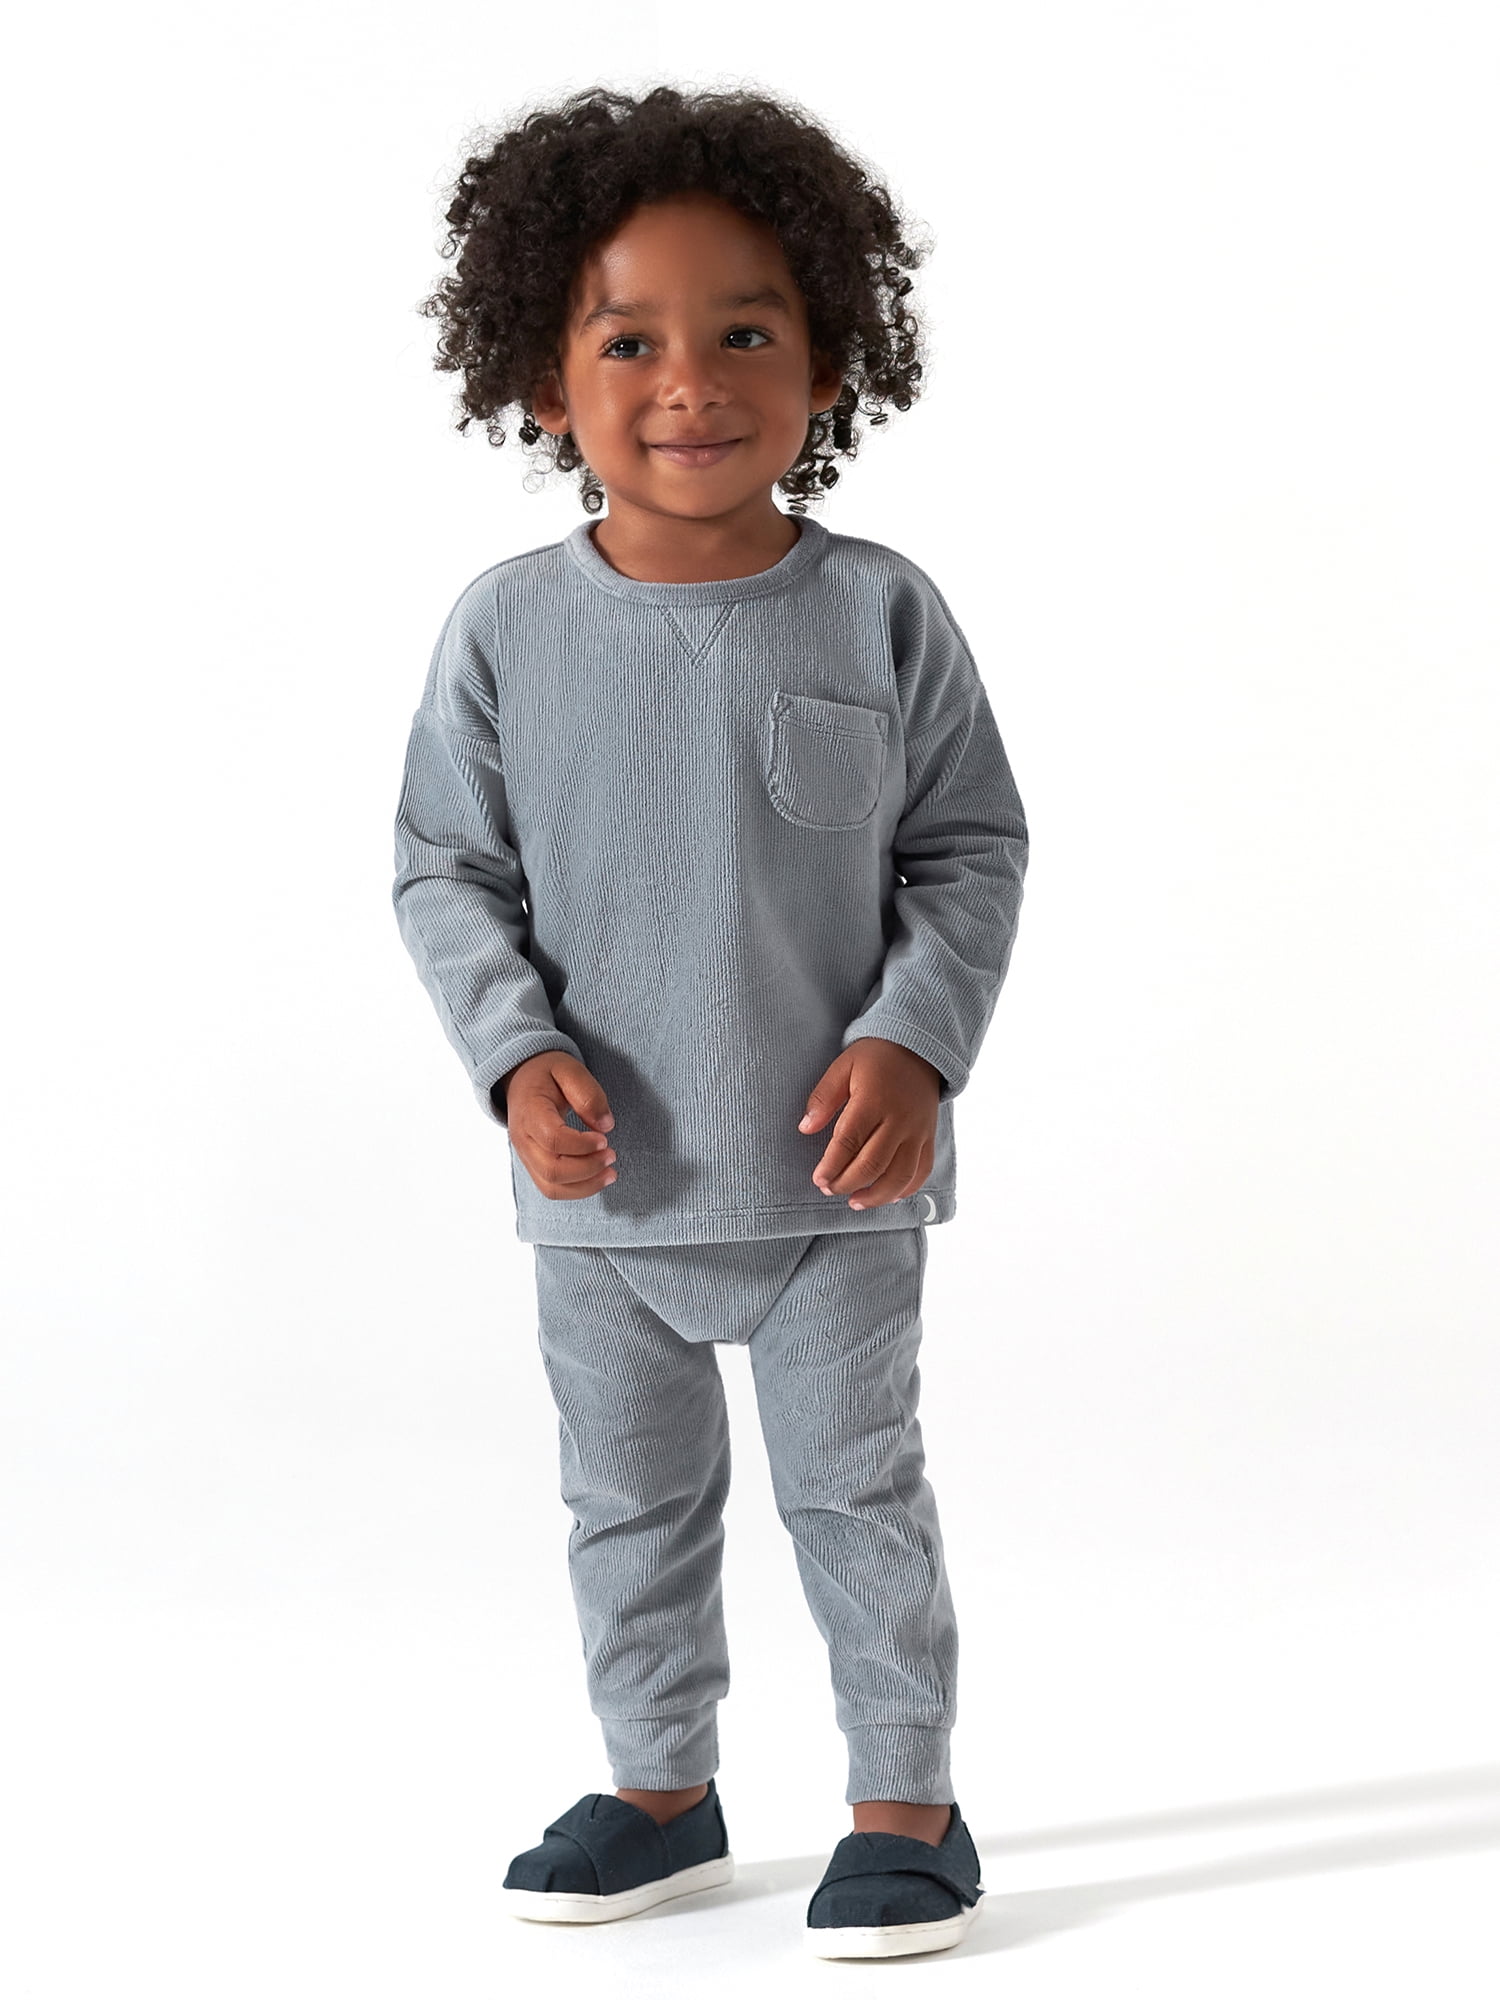 Modern Moments by Gerber Baby Boy or Girl Gender Neutral Long Sleeve Velour Top & Pant, 2-Piece Outfit Set, Sizes 0/3-24 Months